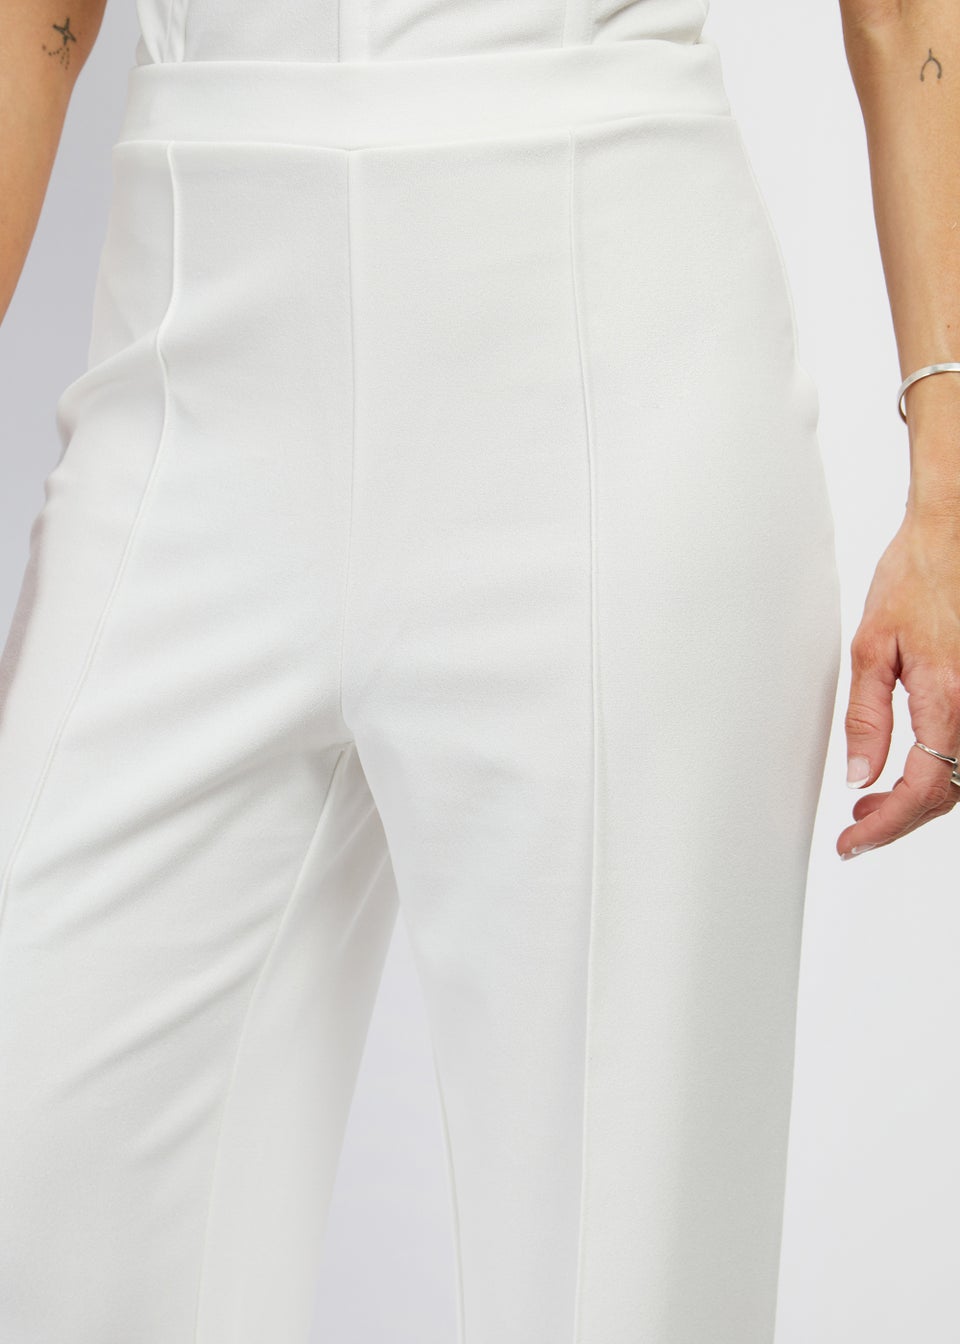 Girls on Film by Dani Dyer Ivory Wide Leg Co-Ord Trousers - Matalan